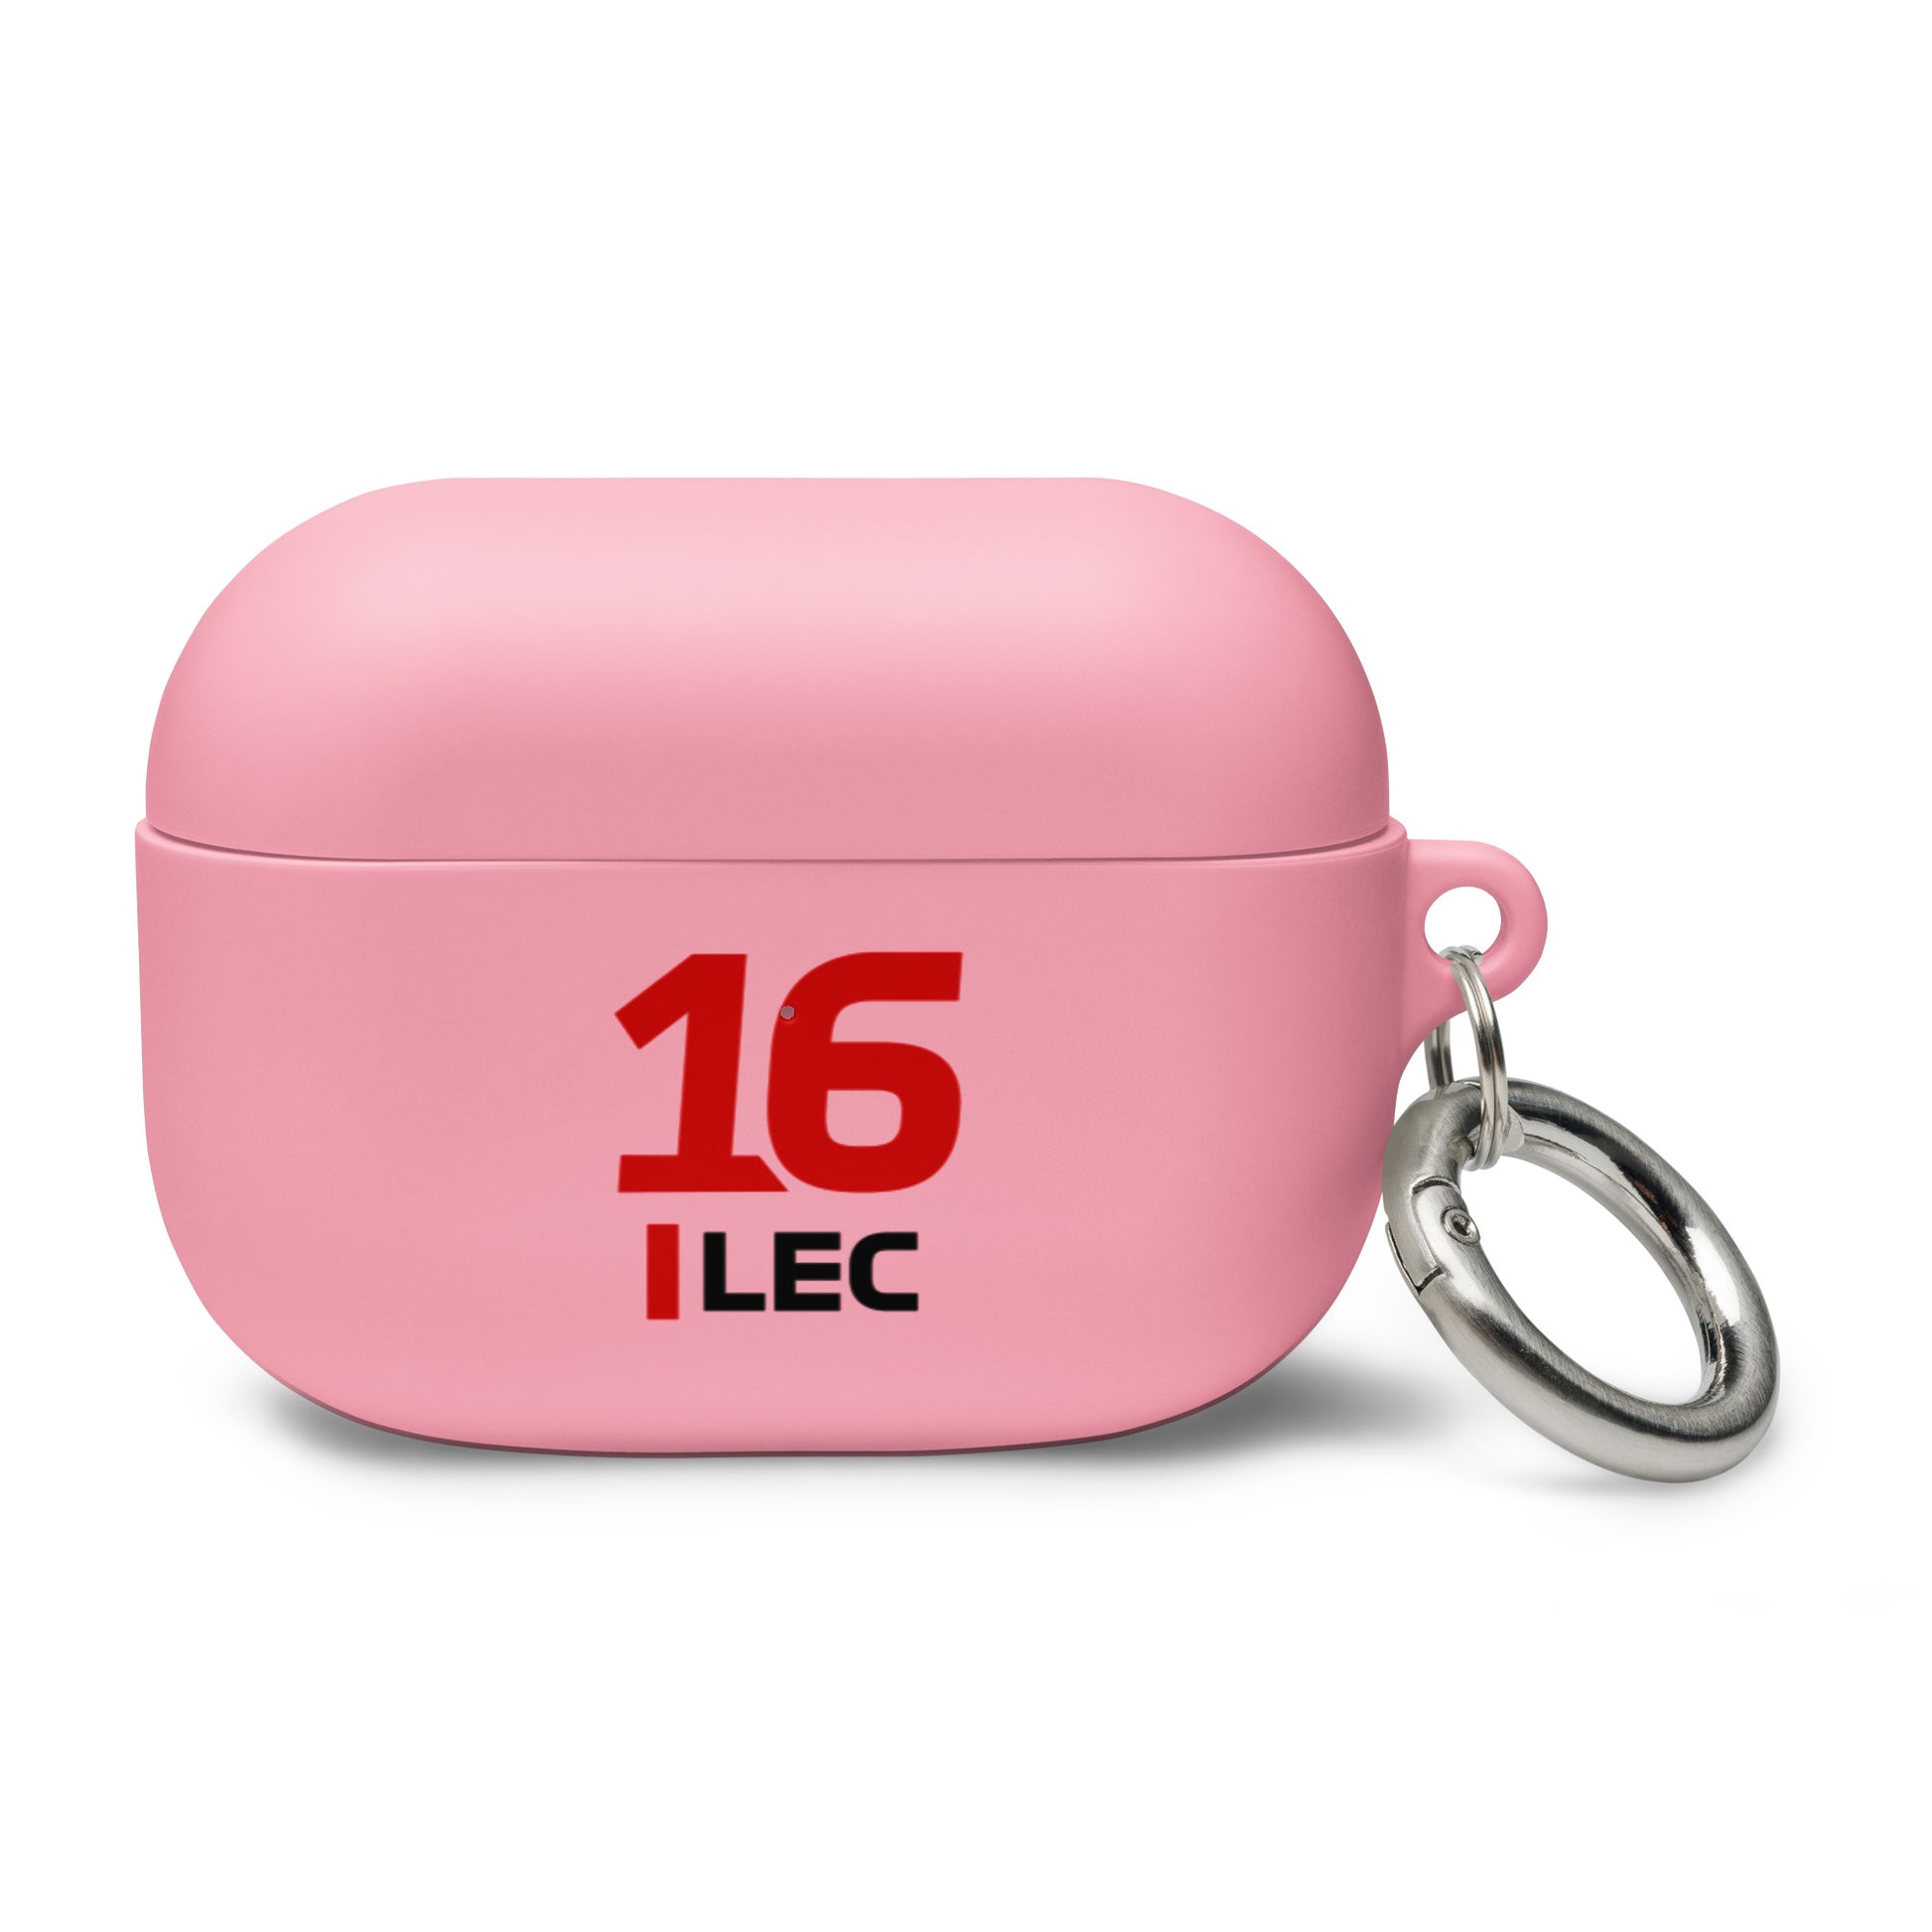 Charles Leclerc AirPods Case pro pink